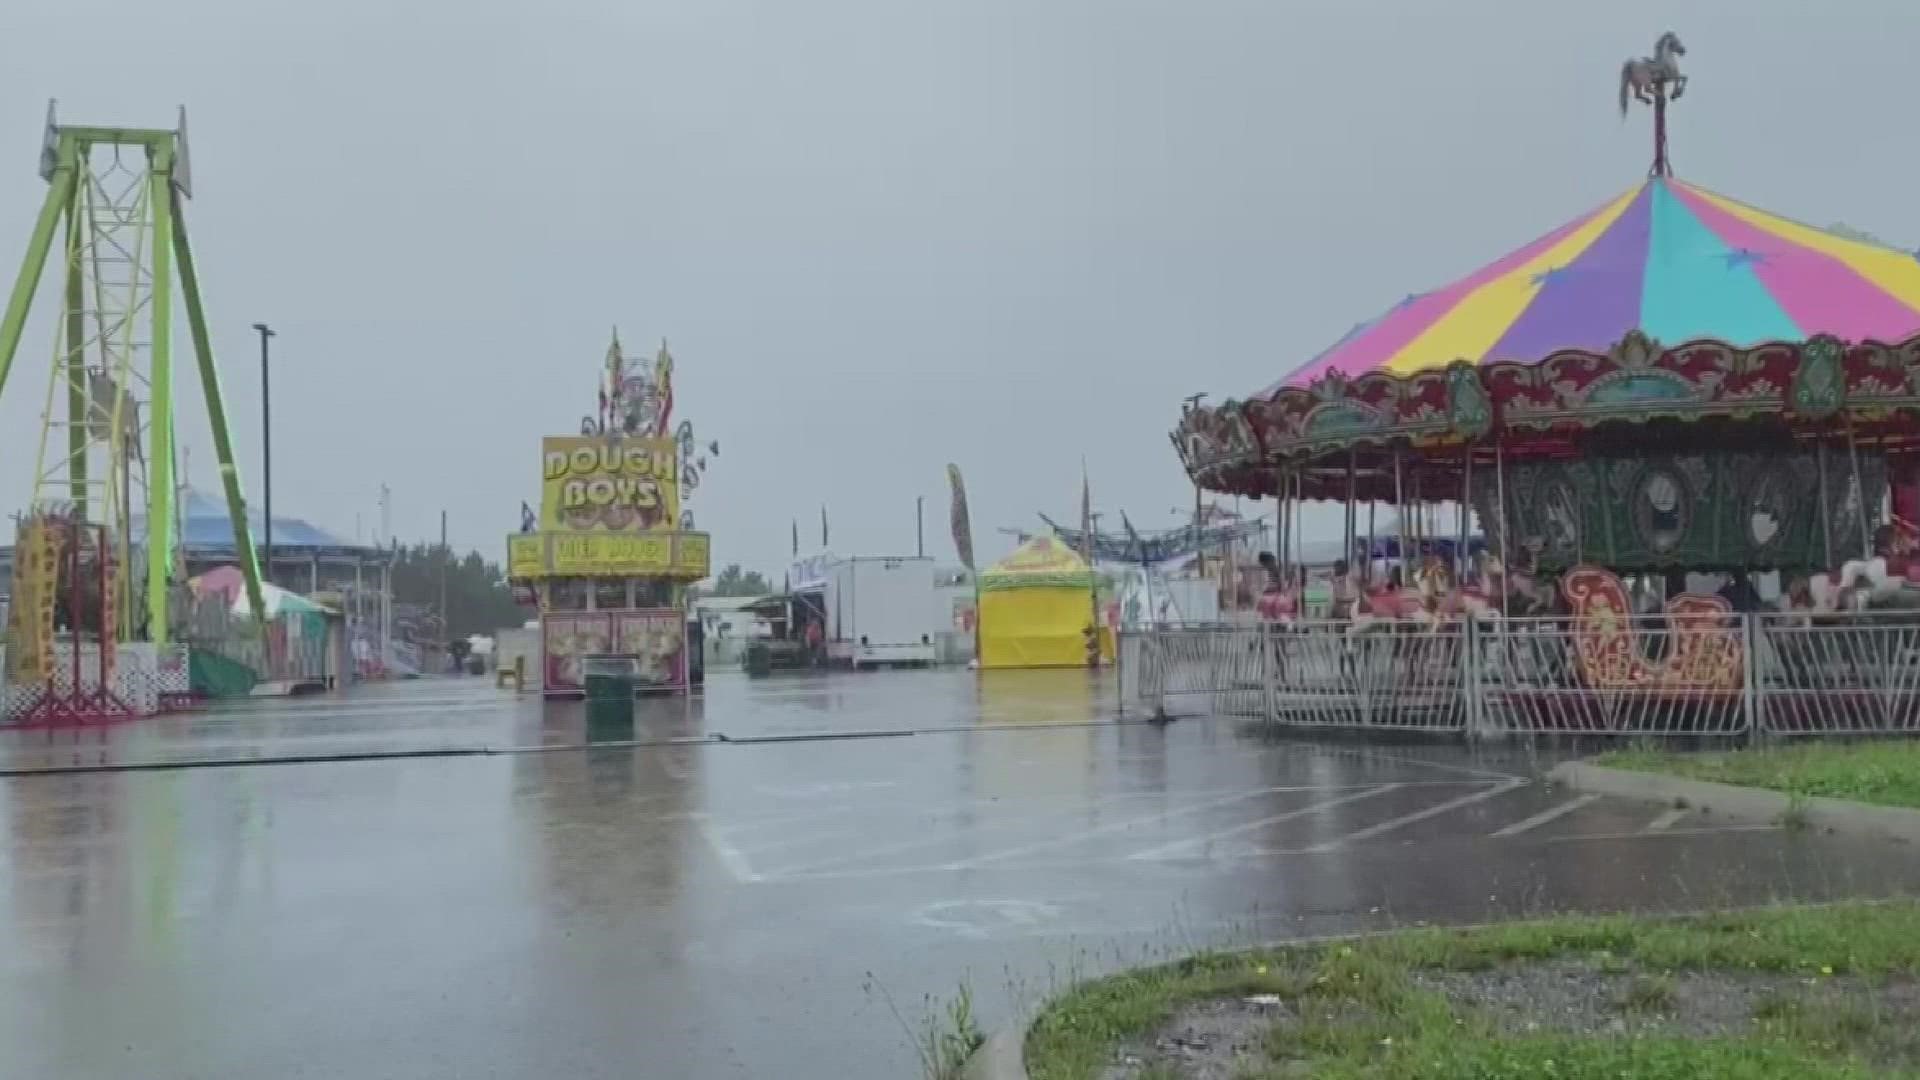 The fair was originally scheduled to begin on Thursday. However, due to bad weather on Thursday, organizers have postponed the fair's opening to noon on Friday.